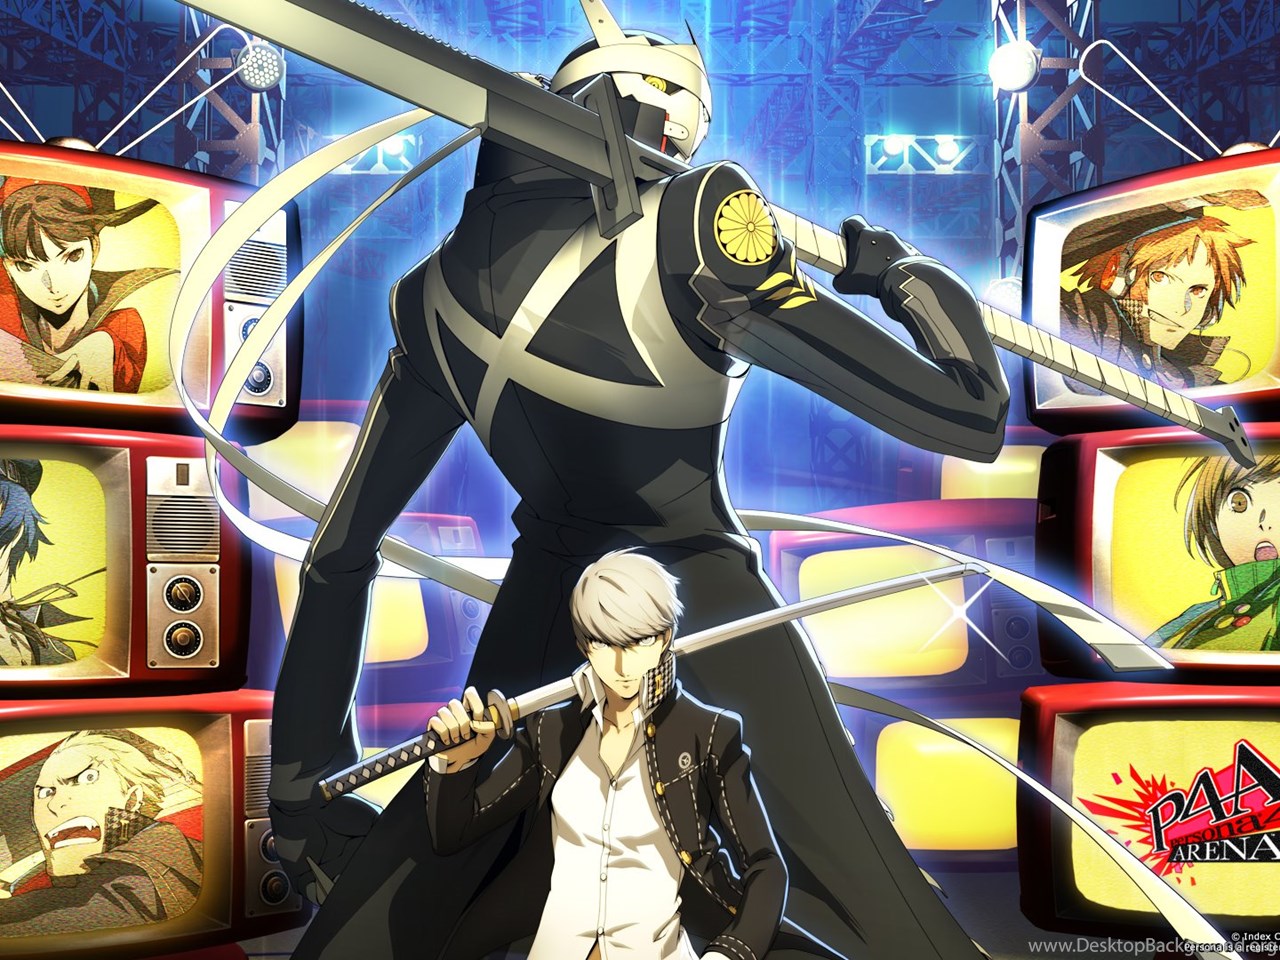 P4G Wallpaper / P4G: Persona 4 Golden Skin and Wallpaper Set for PS ...